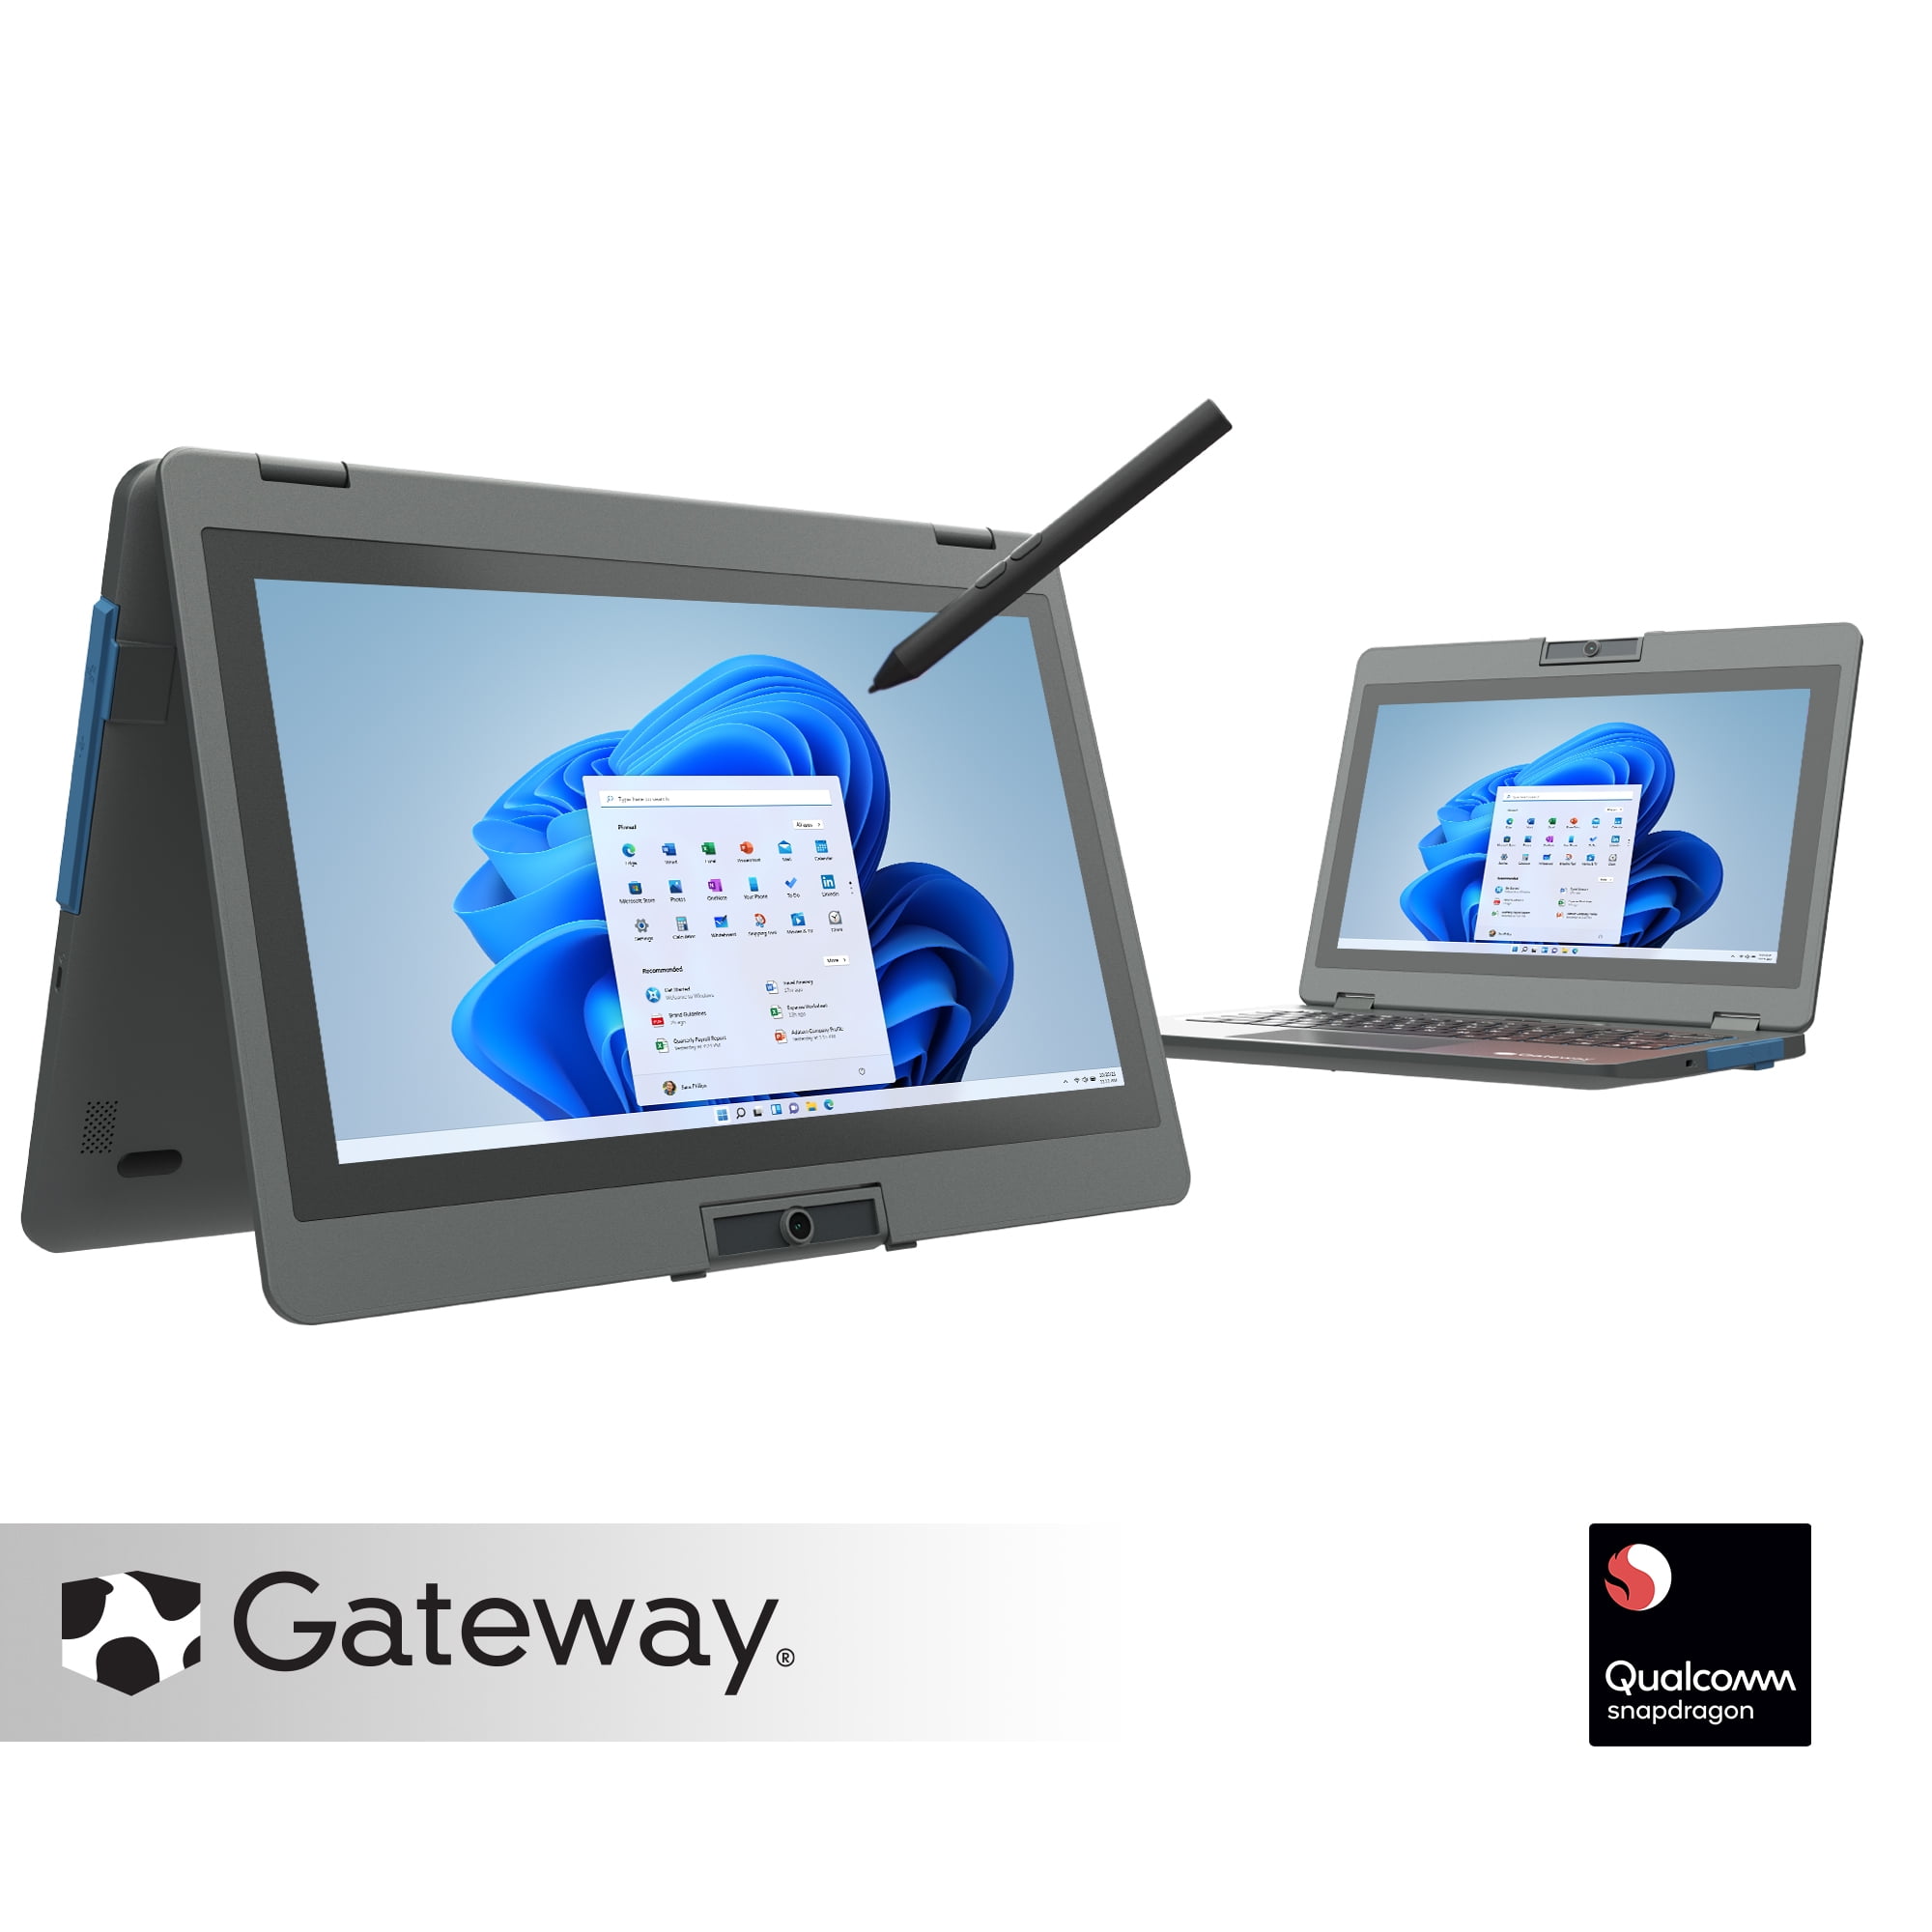 Gateway 11.6" 2-in-1 Convertible Notebook, HD, Snapdragon™ 7c Compute Platform, LTE Compatible, Shockproof, Water Resistant, 4GB/64GB, 2MP Camera, Windows 10 S, Microsoft 365 Personal 1-Year Included